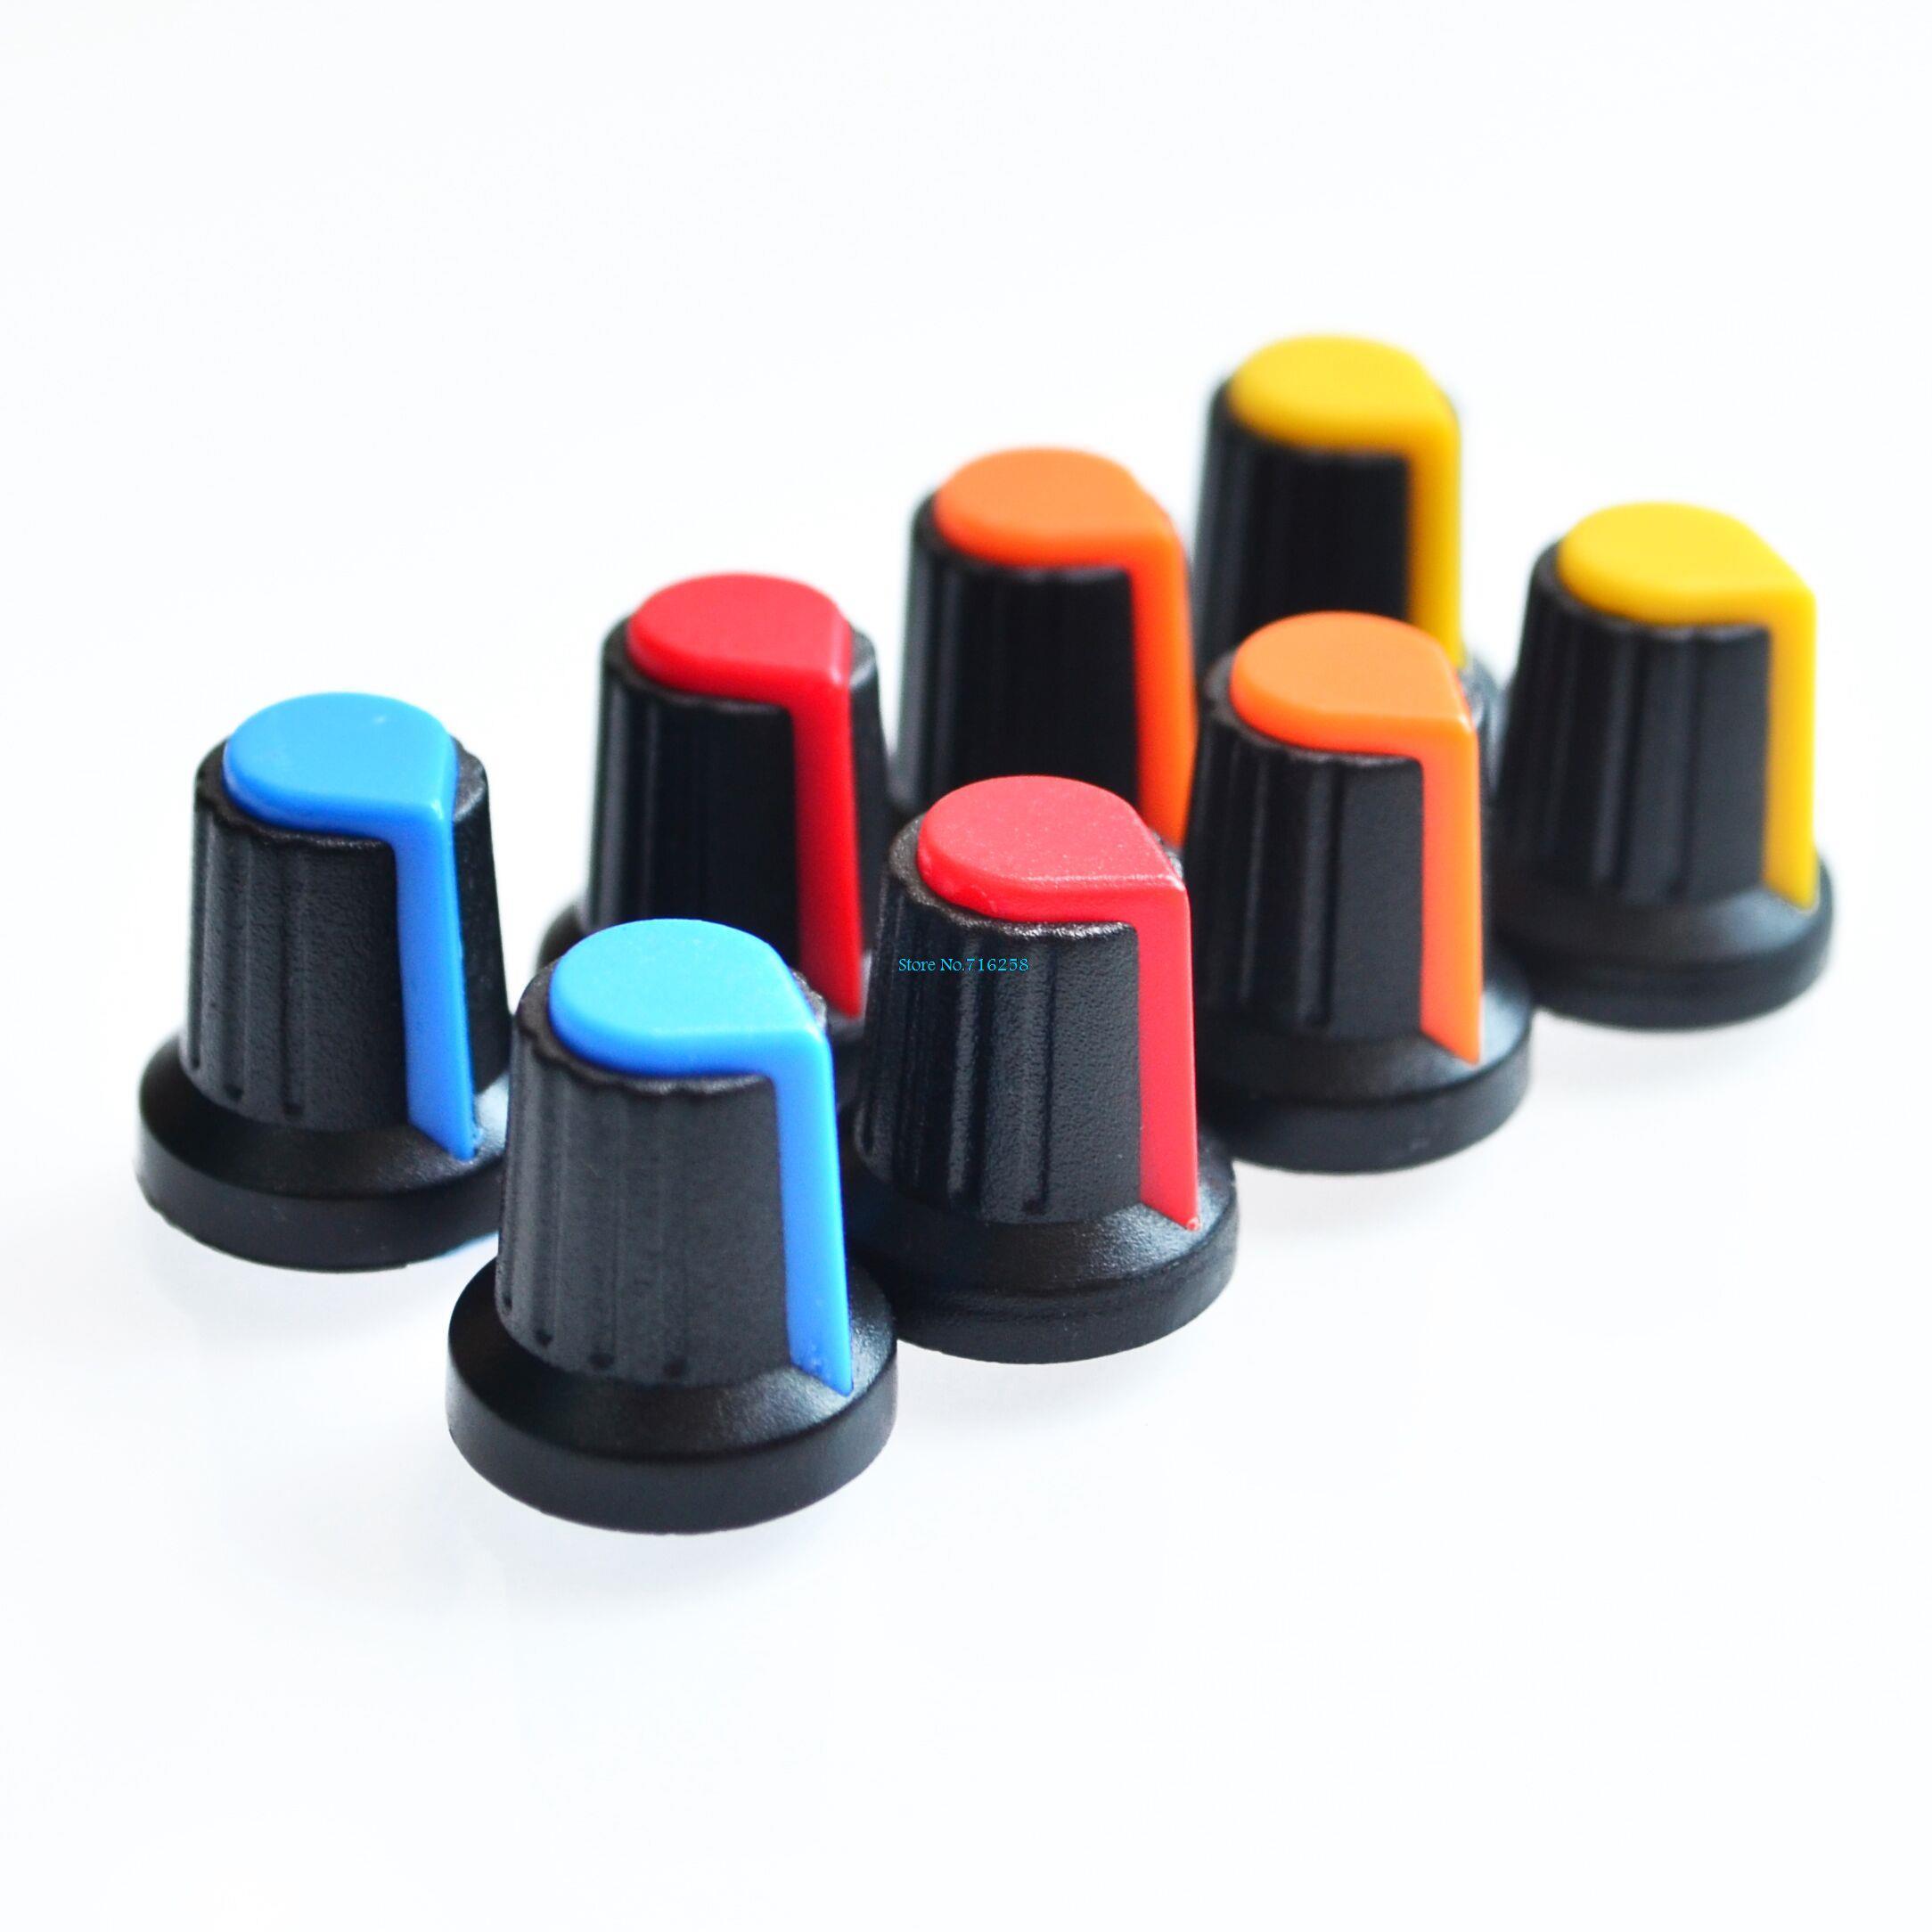 50Pcs High quality plastic potentiometers knobs Knob for single double potentiometers